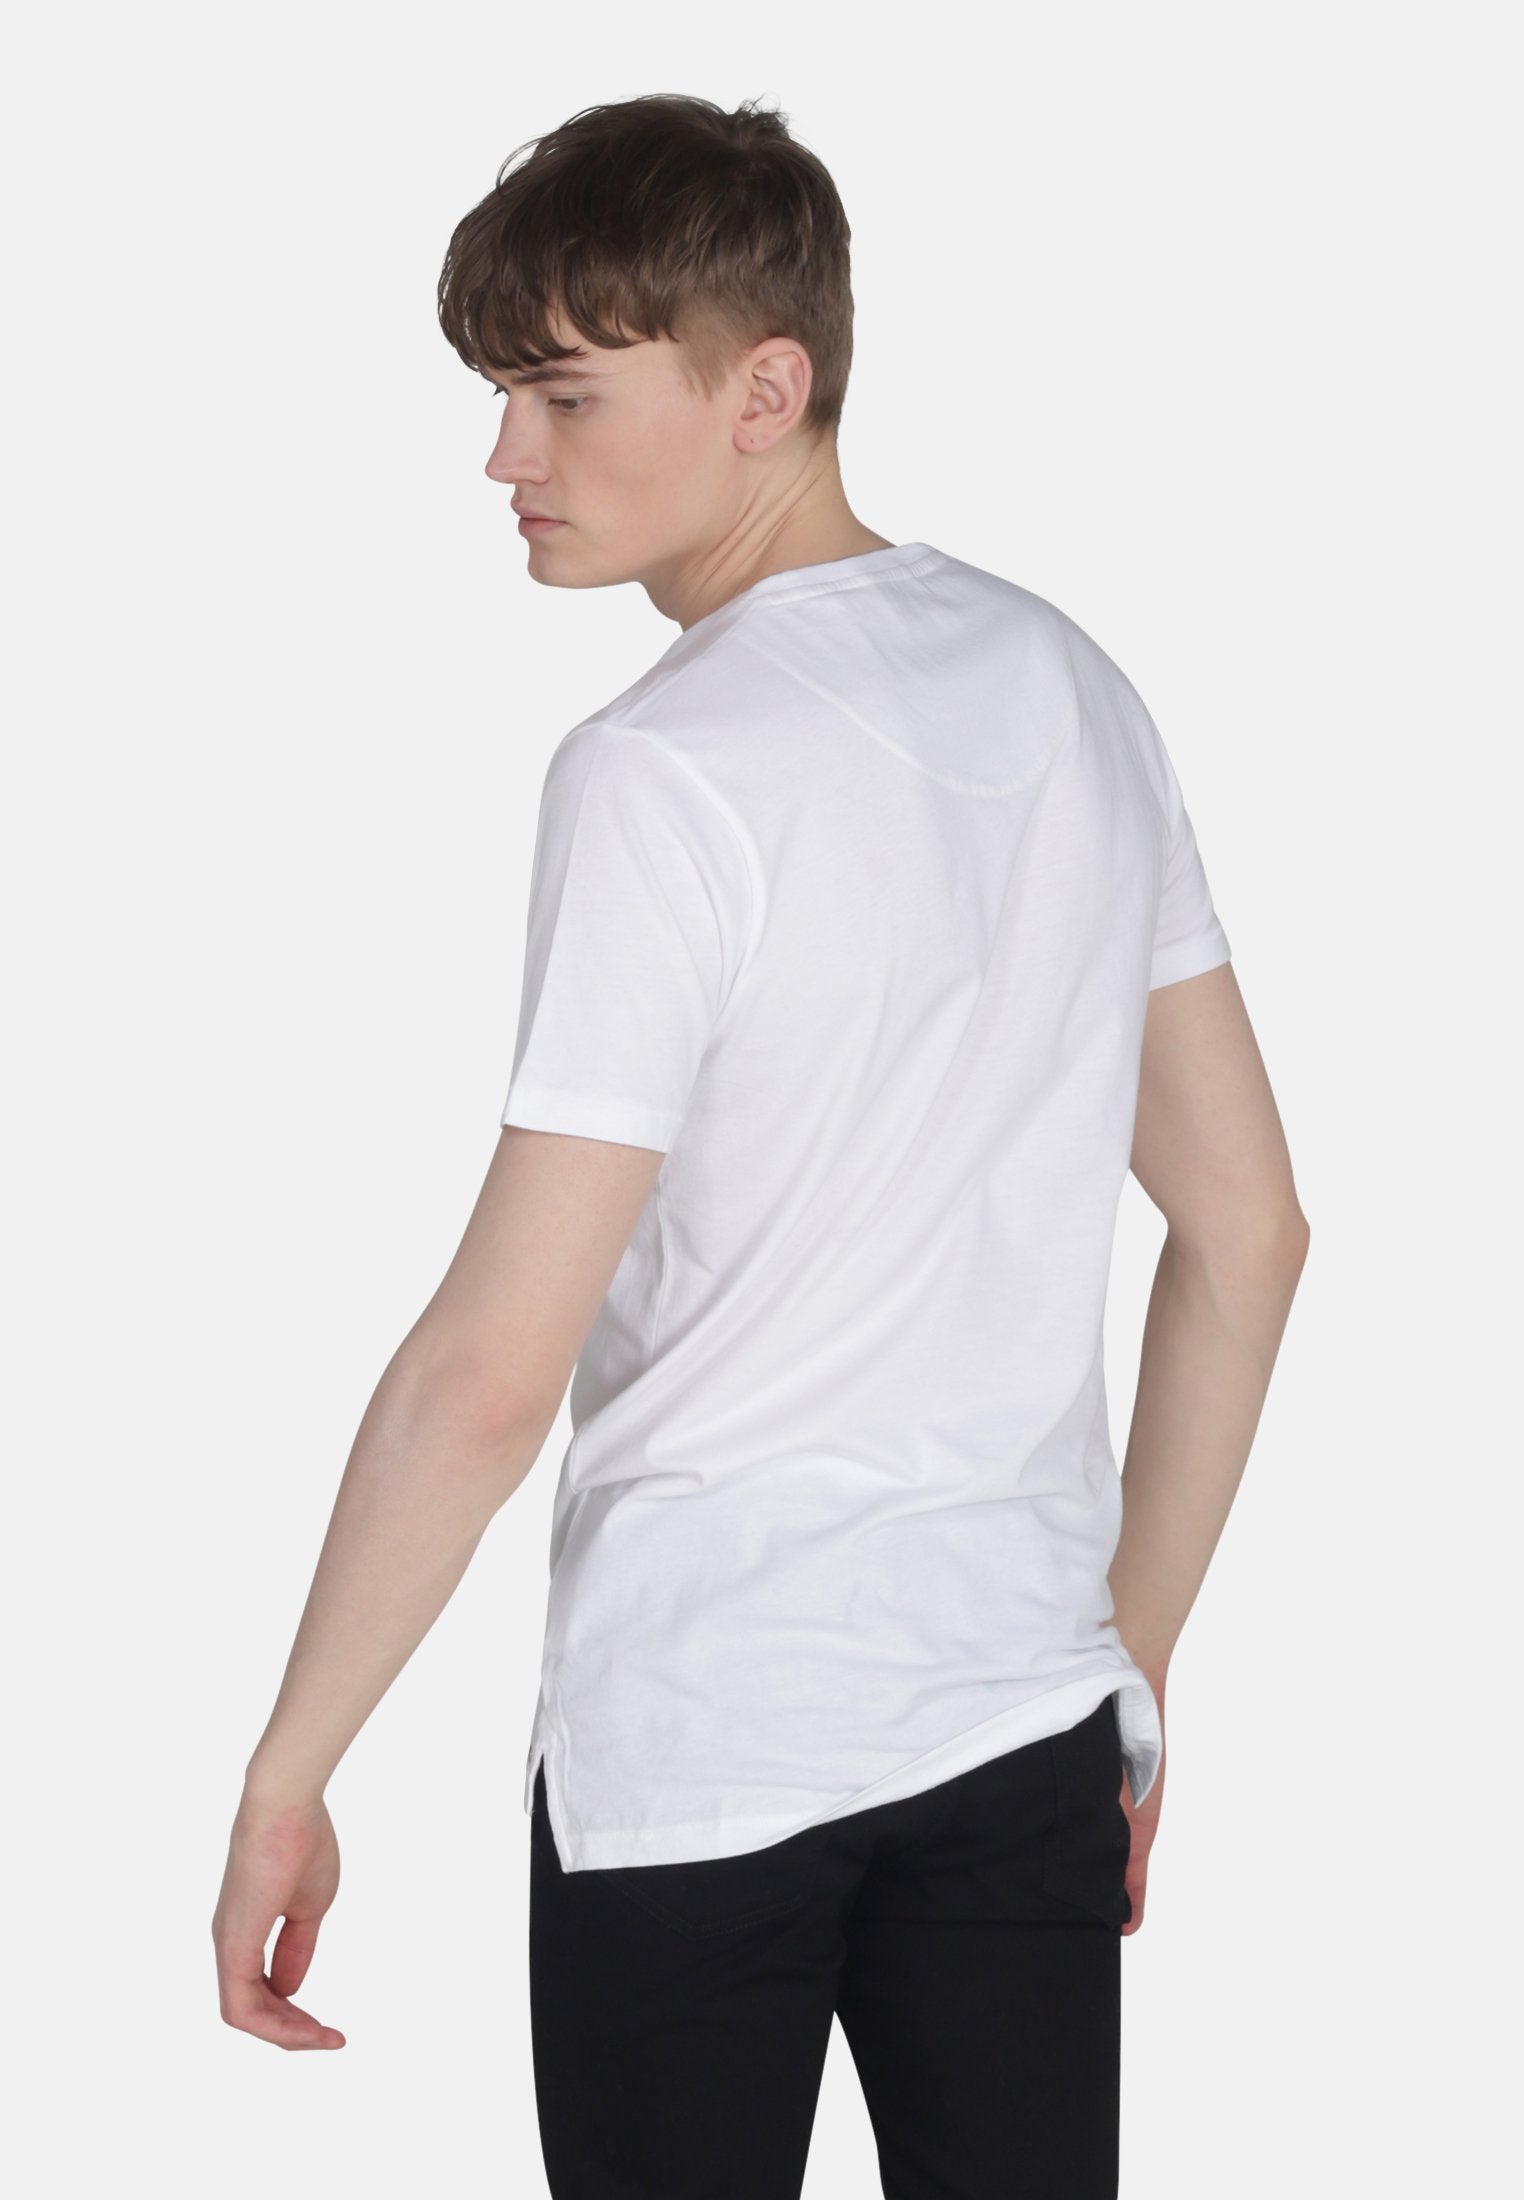 Mantra Tee in White